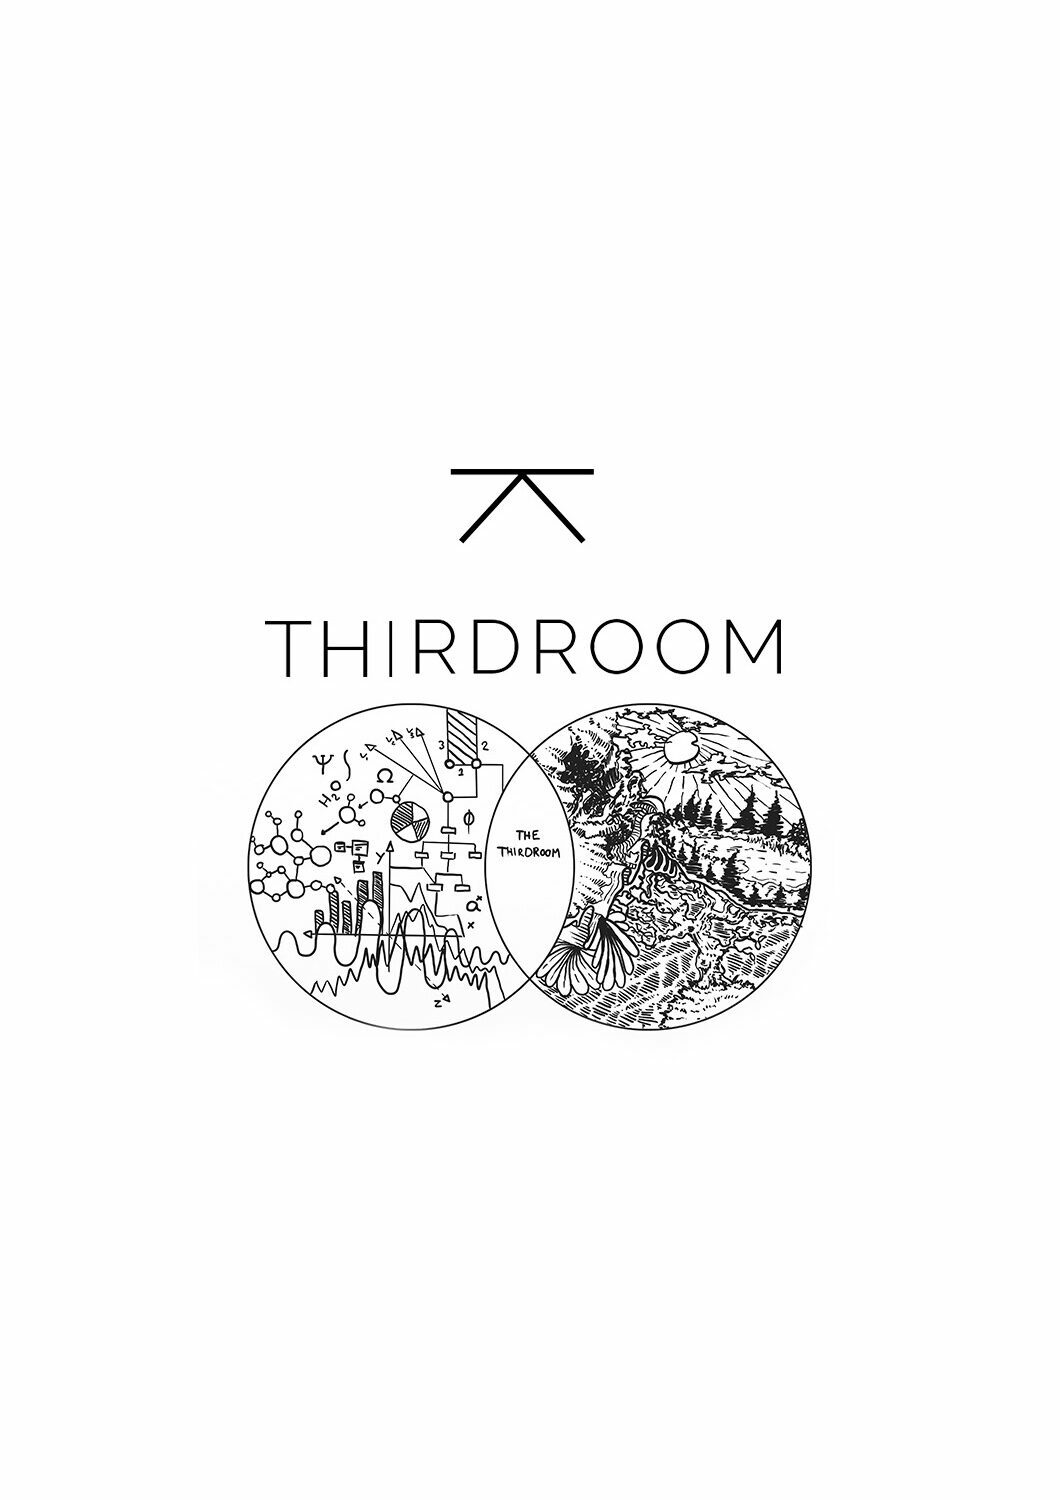 Search algorithms in ThirdRoom